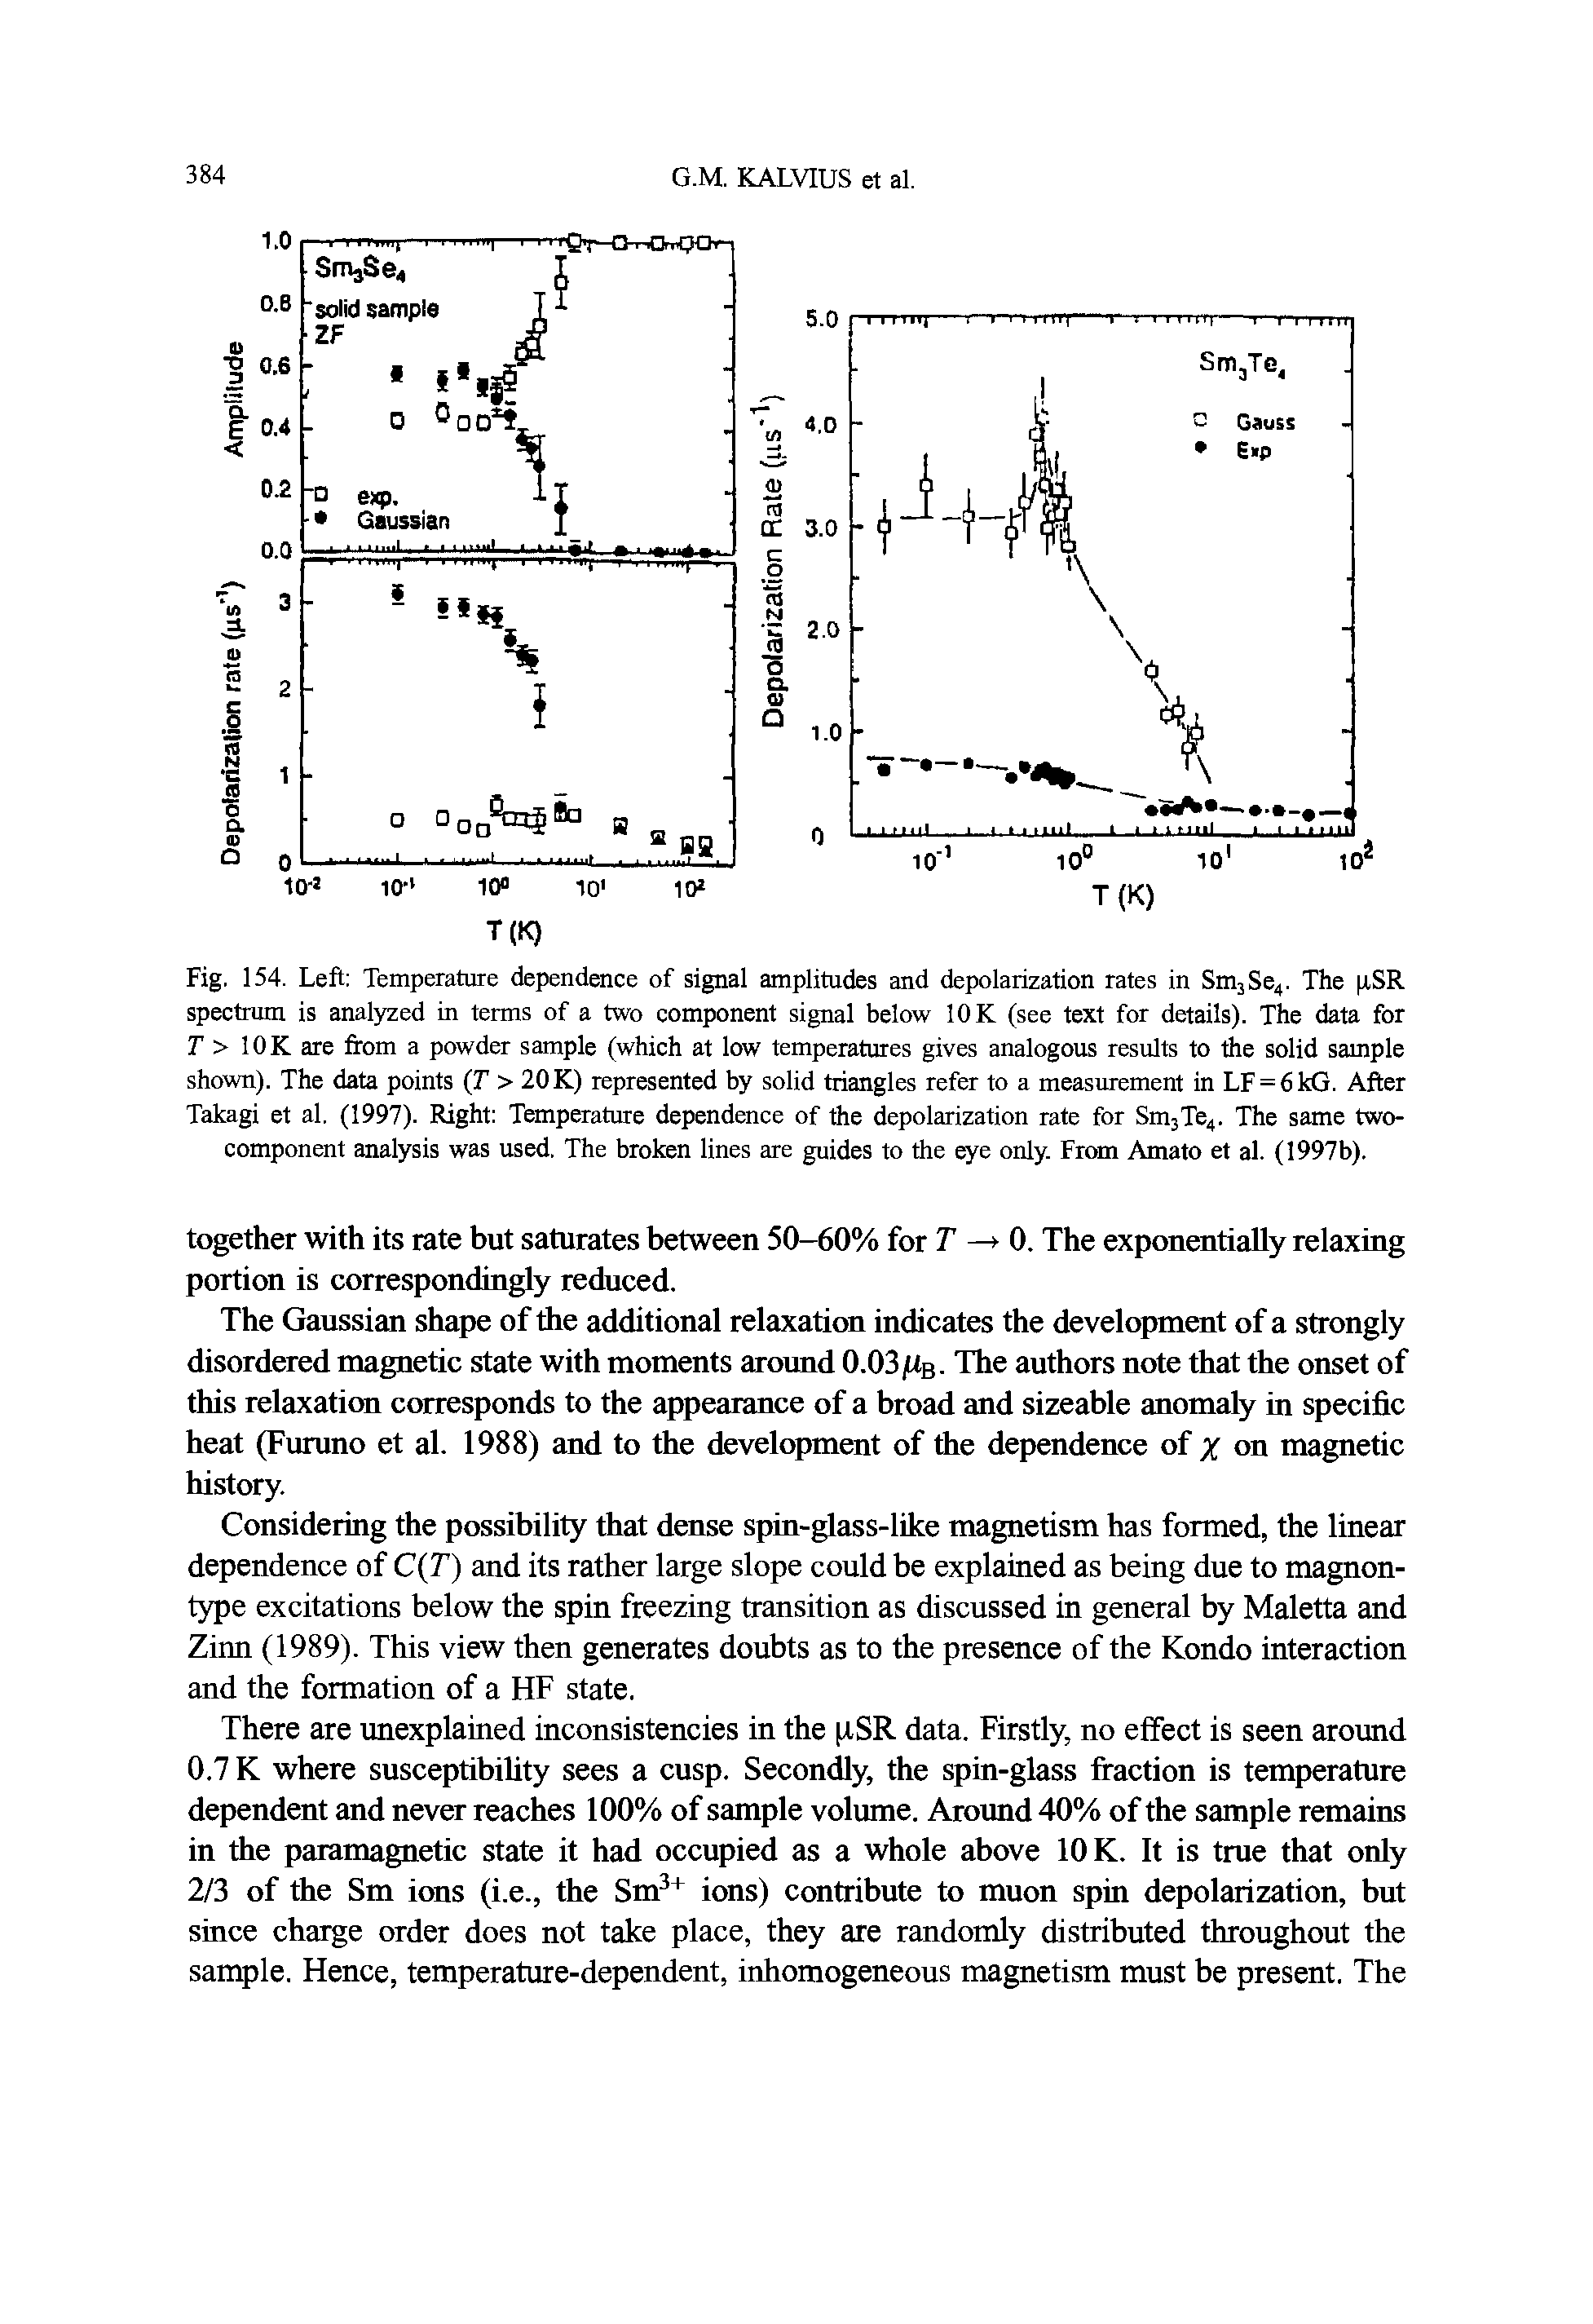 Fig. 154. Left Temperature dependence of signal amplitudes and depolarization rates in Sm3Se4. The tSR spectrum is analyzed in terms of a two component signal below 10 K (see text for details). The data for T > lOK are from a powder sample (which at low temperatures gives analogous results to the solid sample shown). The data points (T > 20 K) represented by solid triangles refer to a measurement in LF = 6kG. After Takagi et al. (1997). Right Temperature dependence of the depolarization rate for Sm3Te4. The same two-component analysis was used. The broken lines are guides to the q e only. Frran Amato et al. (1997b).